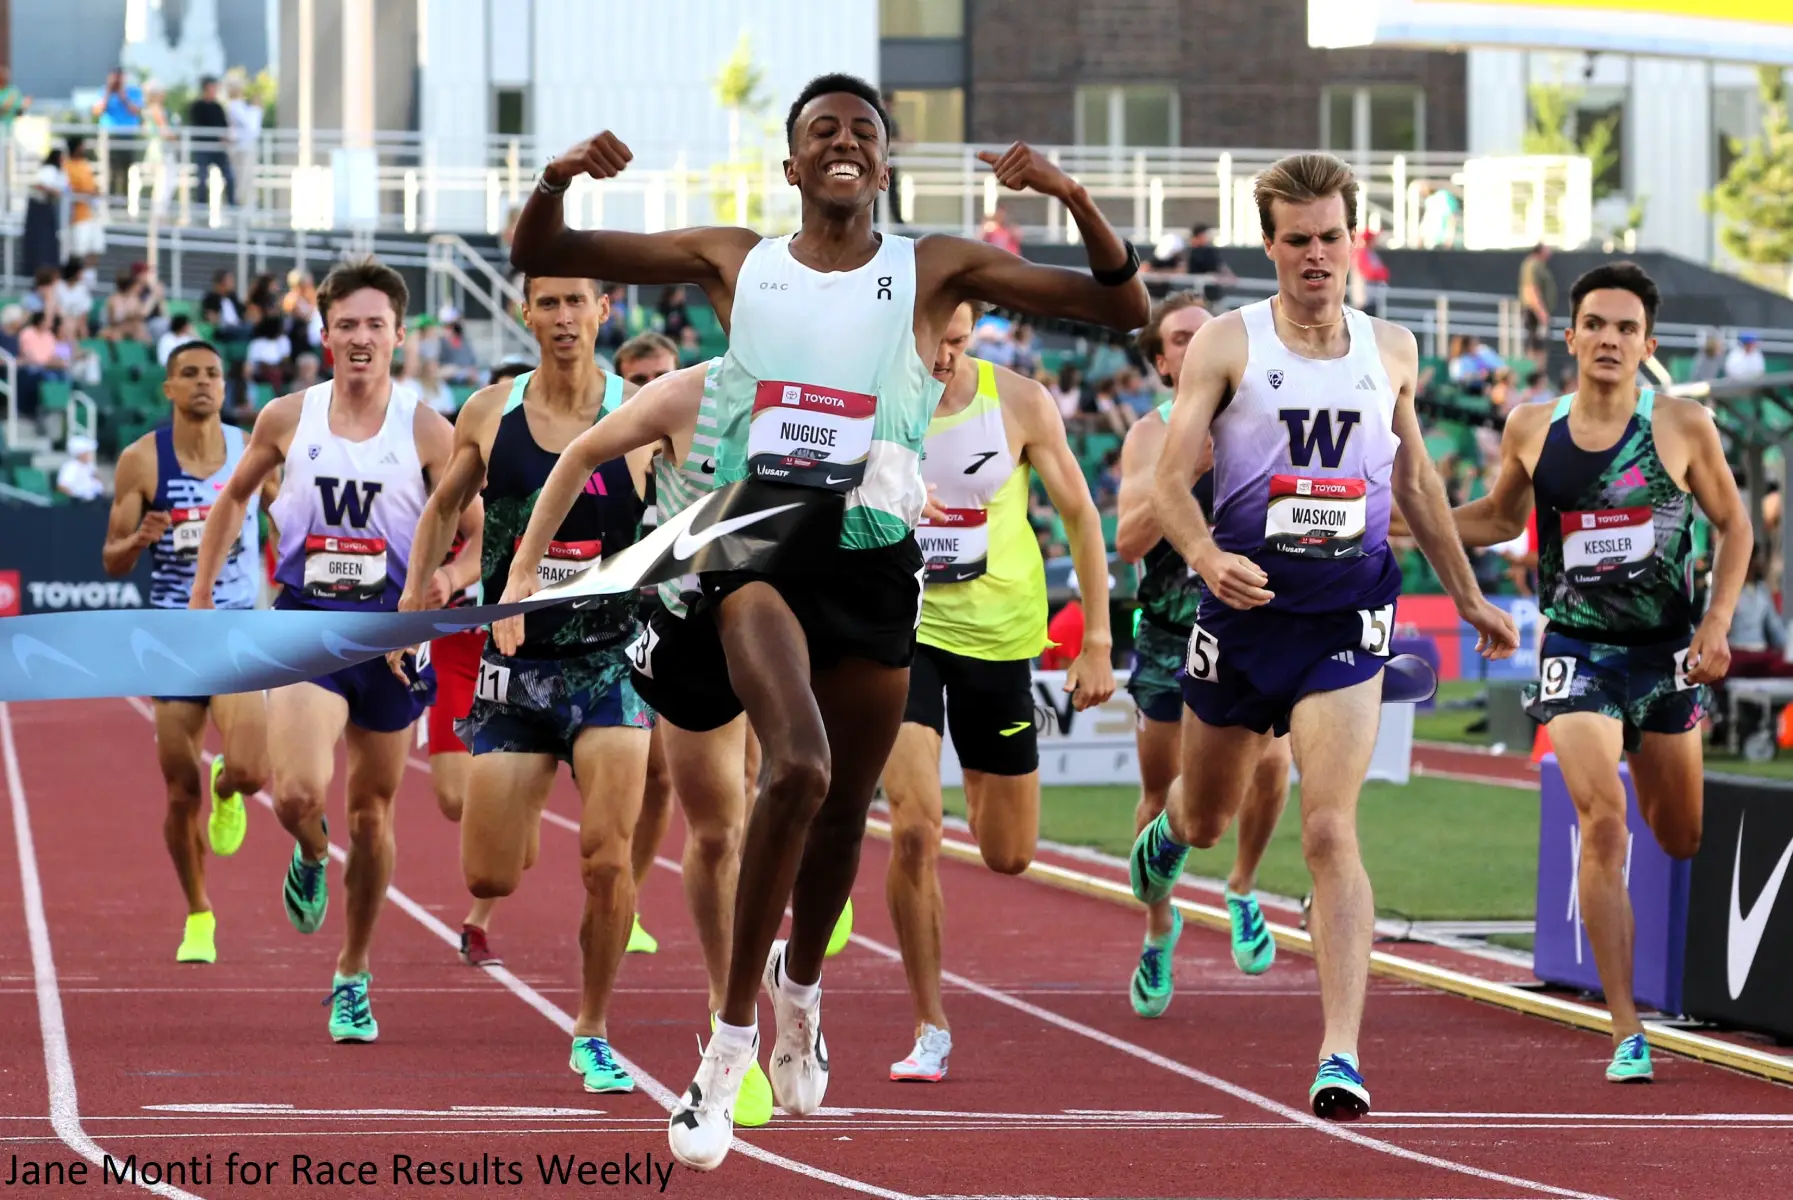 Yared Nuguse eyes Alan Webb’s Mile Record at Prefontaine Classic?